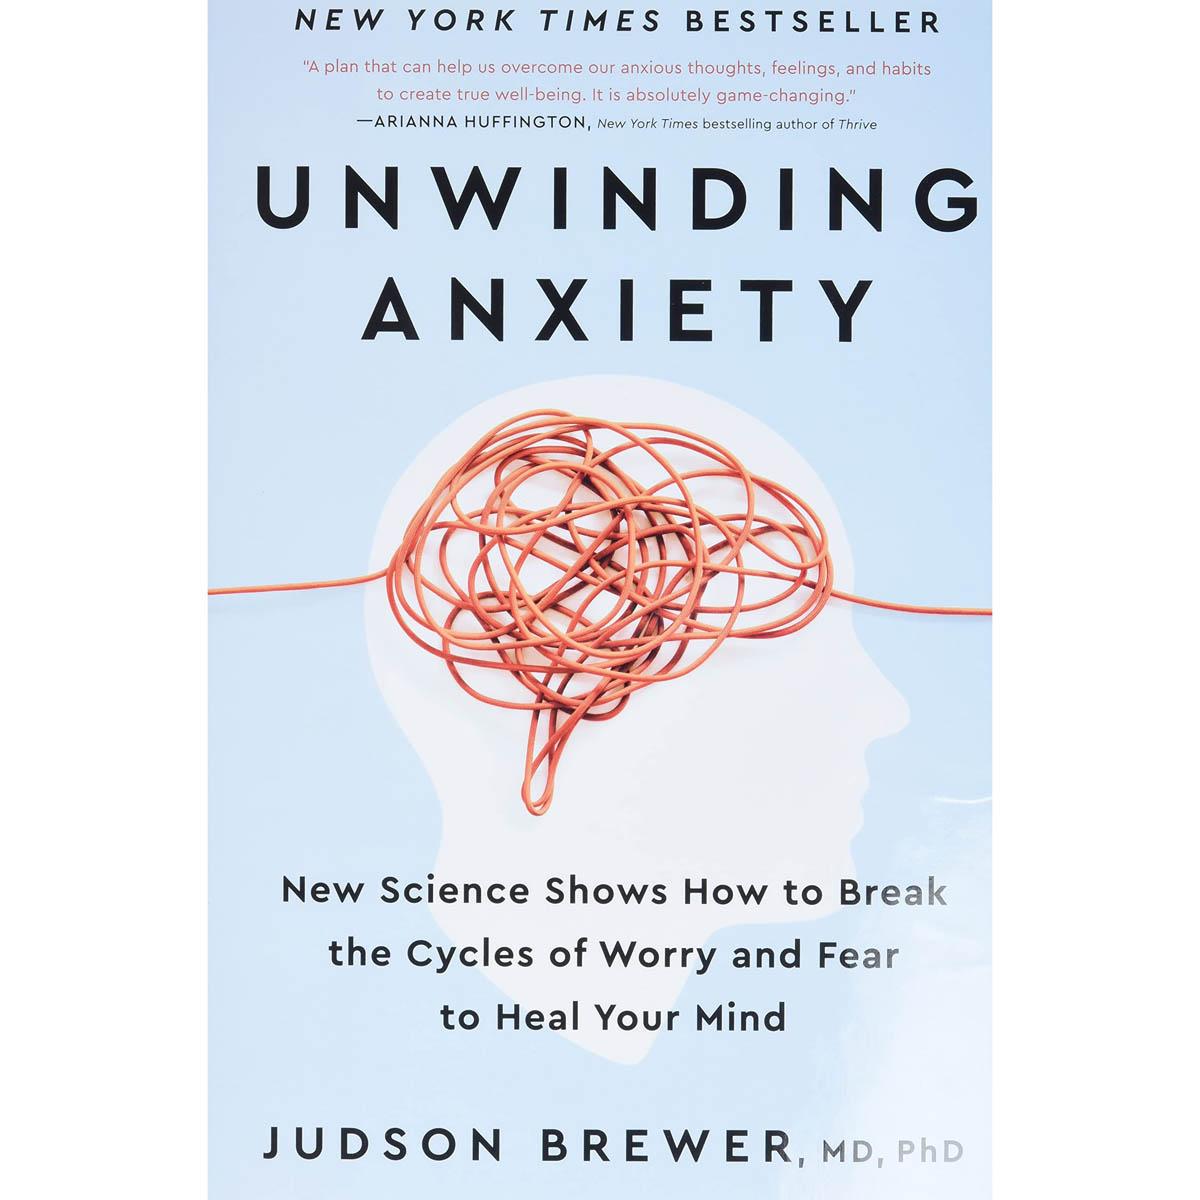 Unwinding Anxiety New Science Shows Break the Cycles of Worry eBook for $2.99